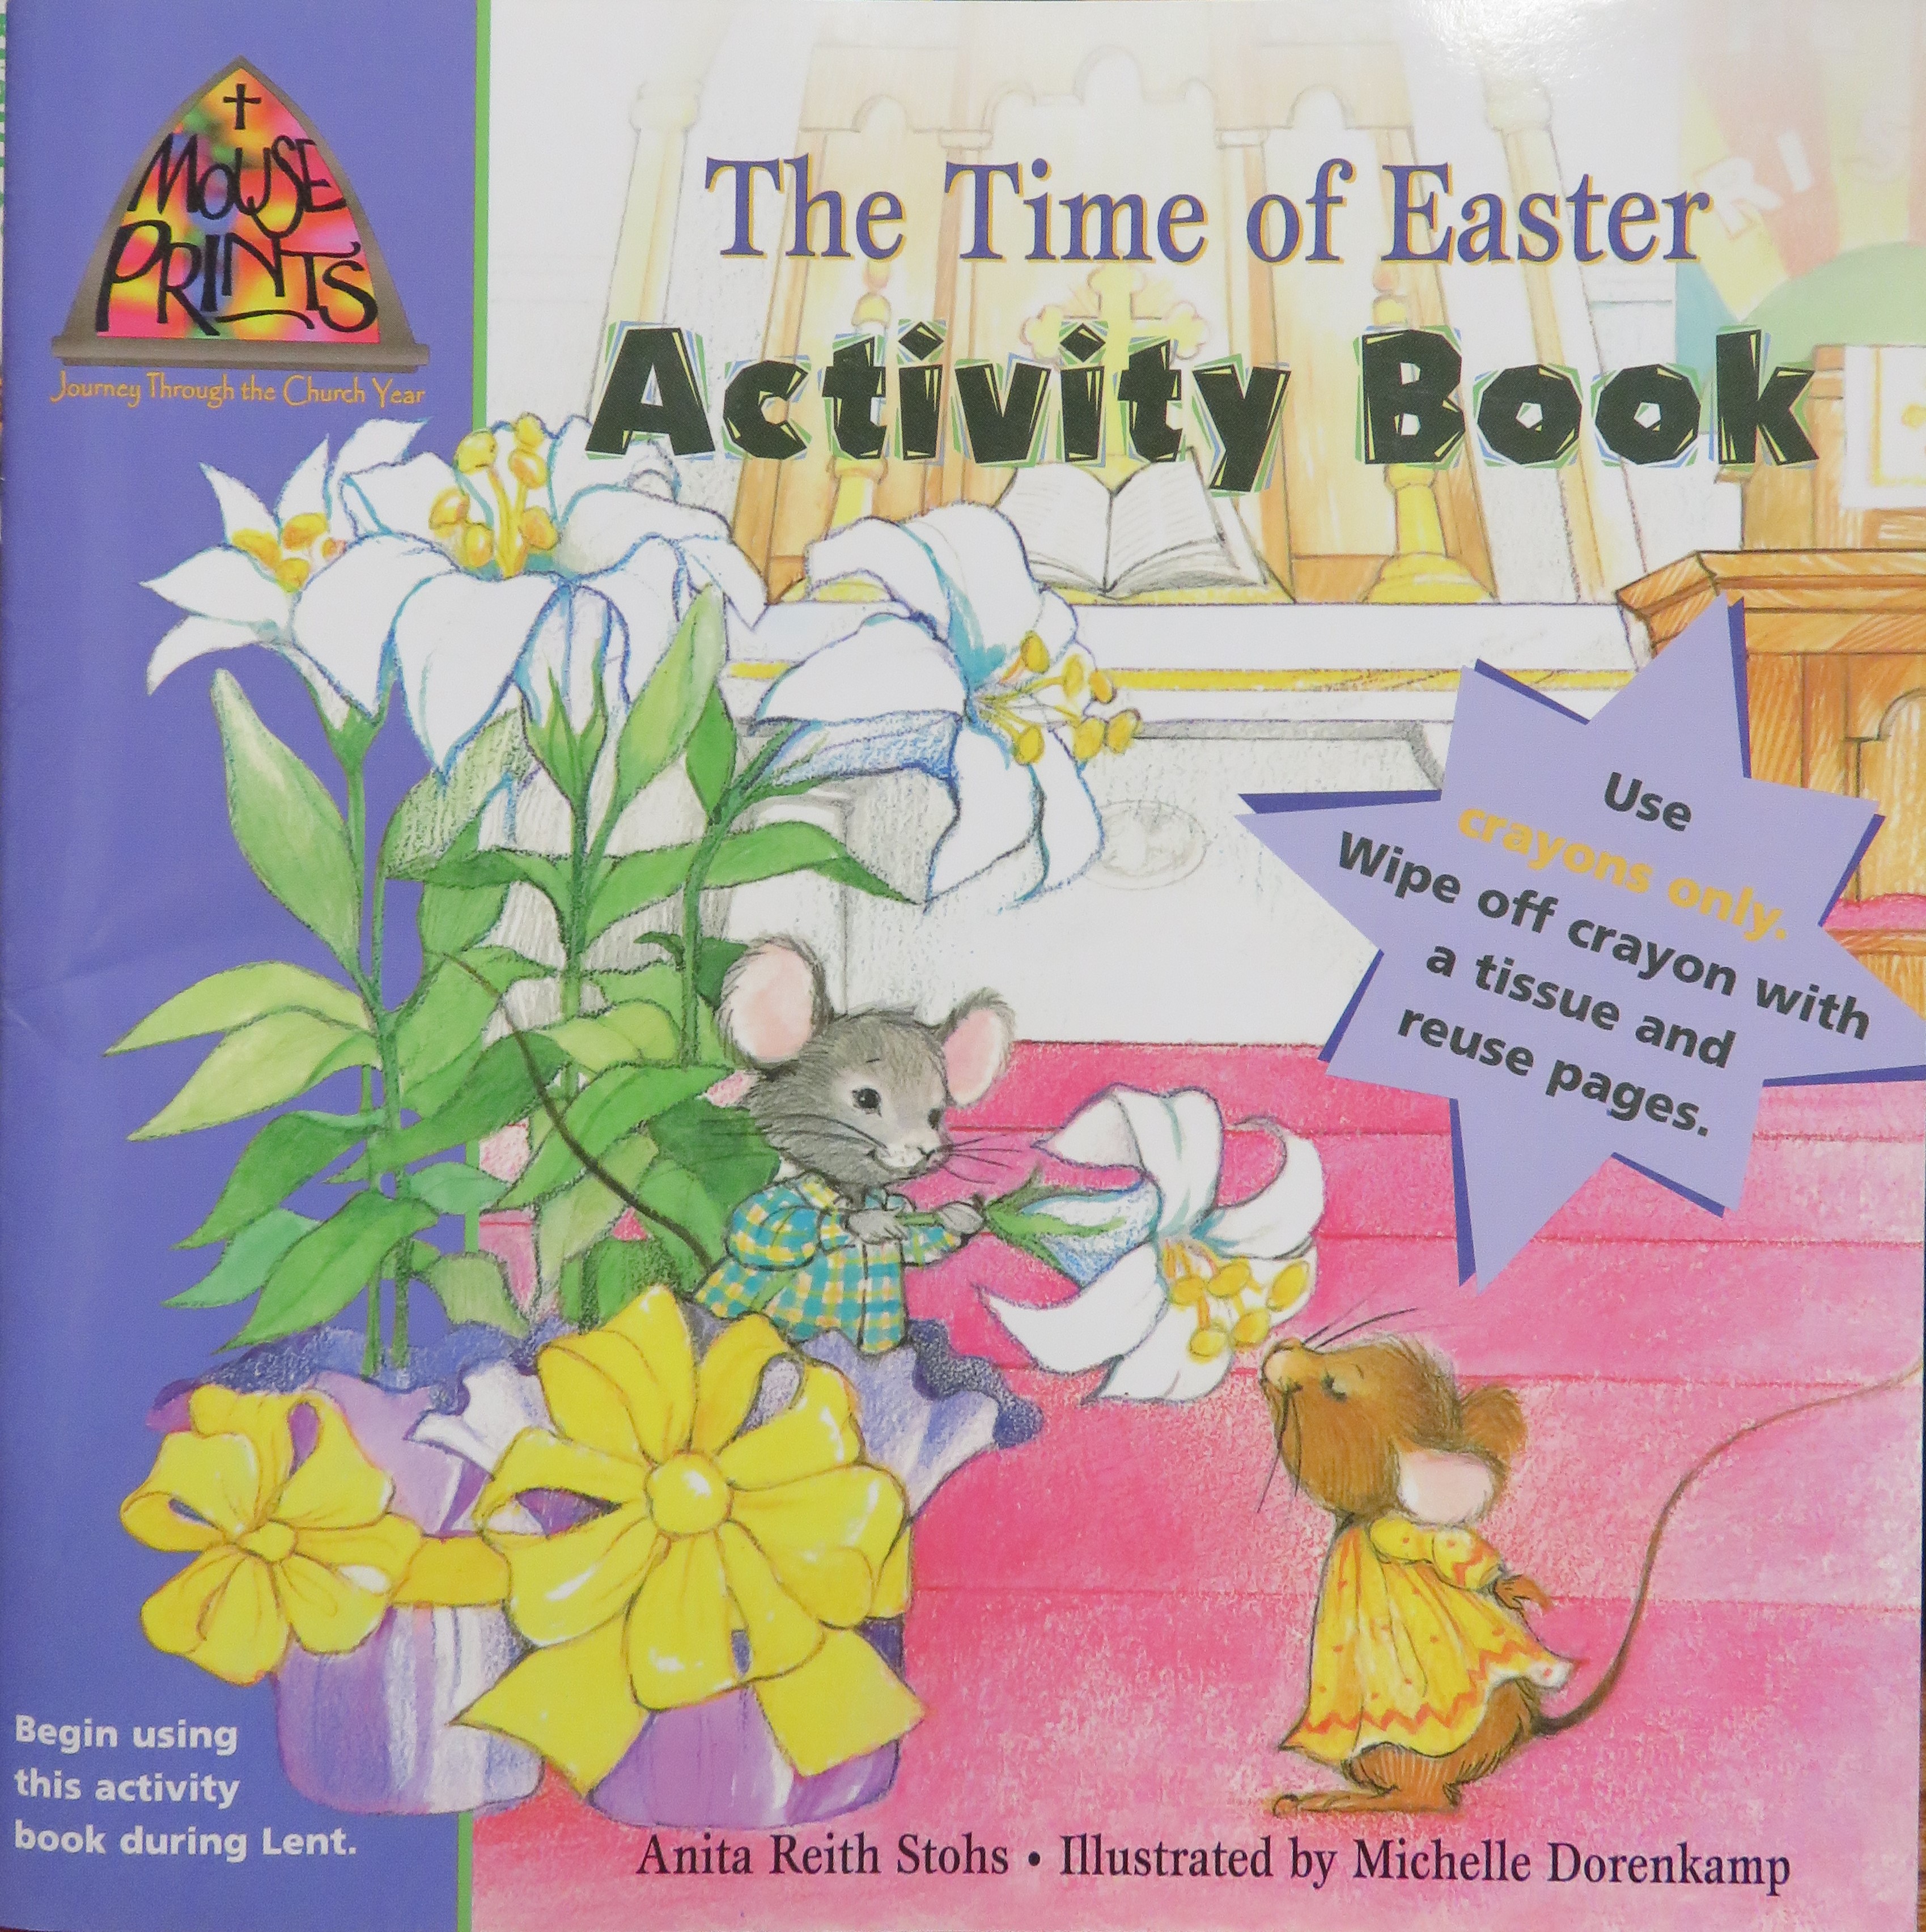 The Time of Easter Activity Book